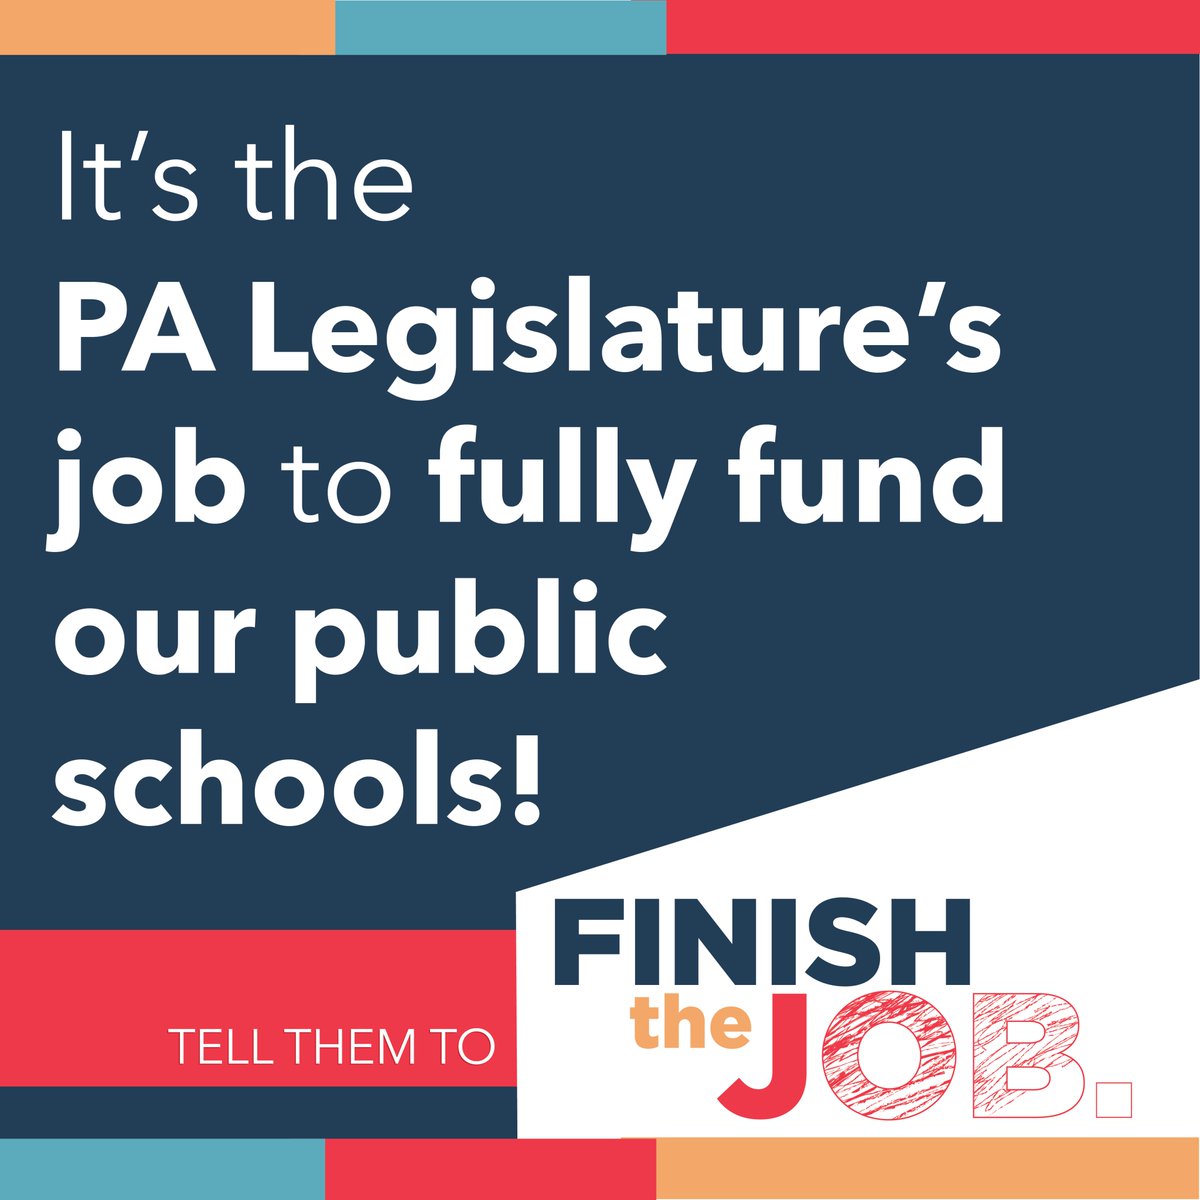 The data is clear. 

The Courts have ruled. 

There is $14B in the state’s bank accounts that would cover at least 4 yrs of fully and fairly funded education for every child in the Commonwealth, while leaving billions in the rainy day fund.

The legislature must #FinishTheJob!